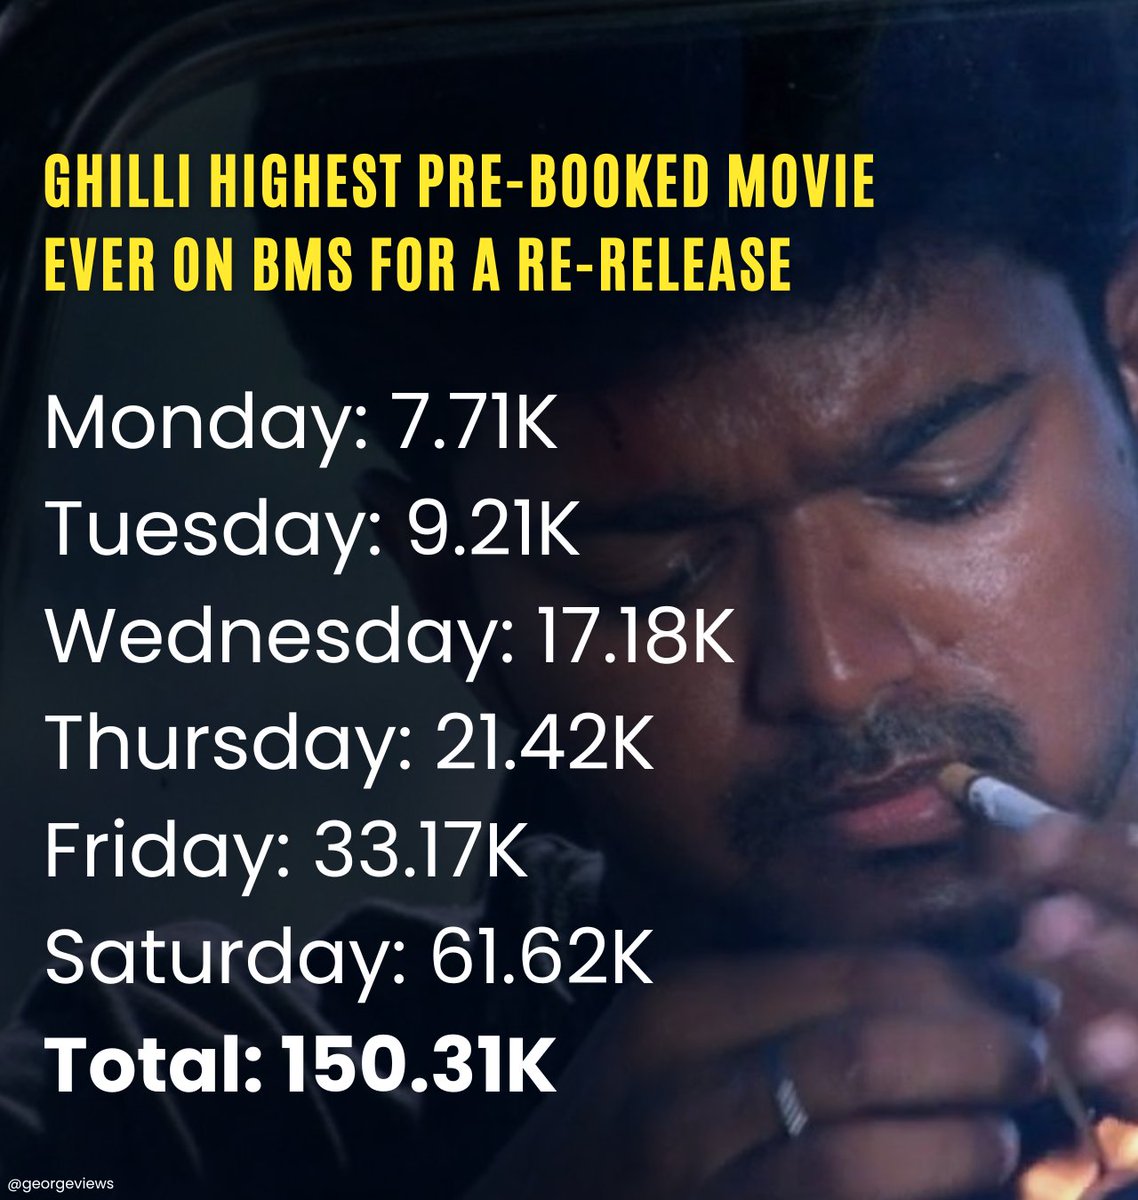 BIG BREAKING 🚨 #Ghilli becomes the first re-release in Indian cinema to get 100K+ tickets booked on BMS! 🔥 All records shattered! #ThalapathyVijay